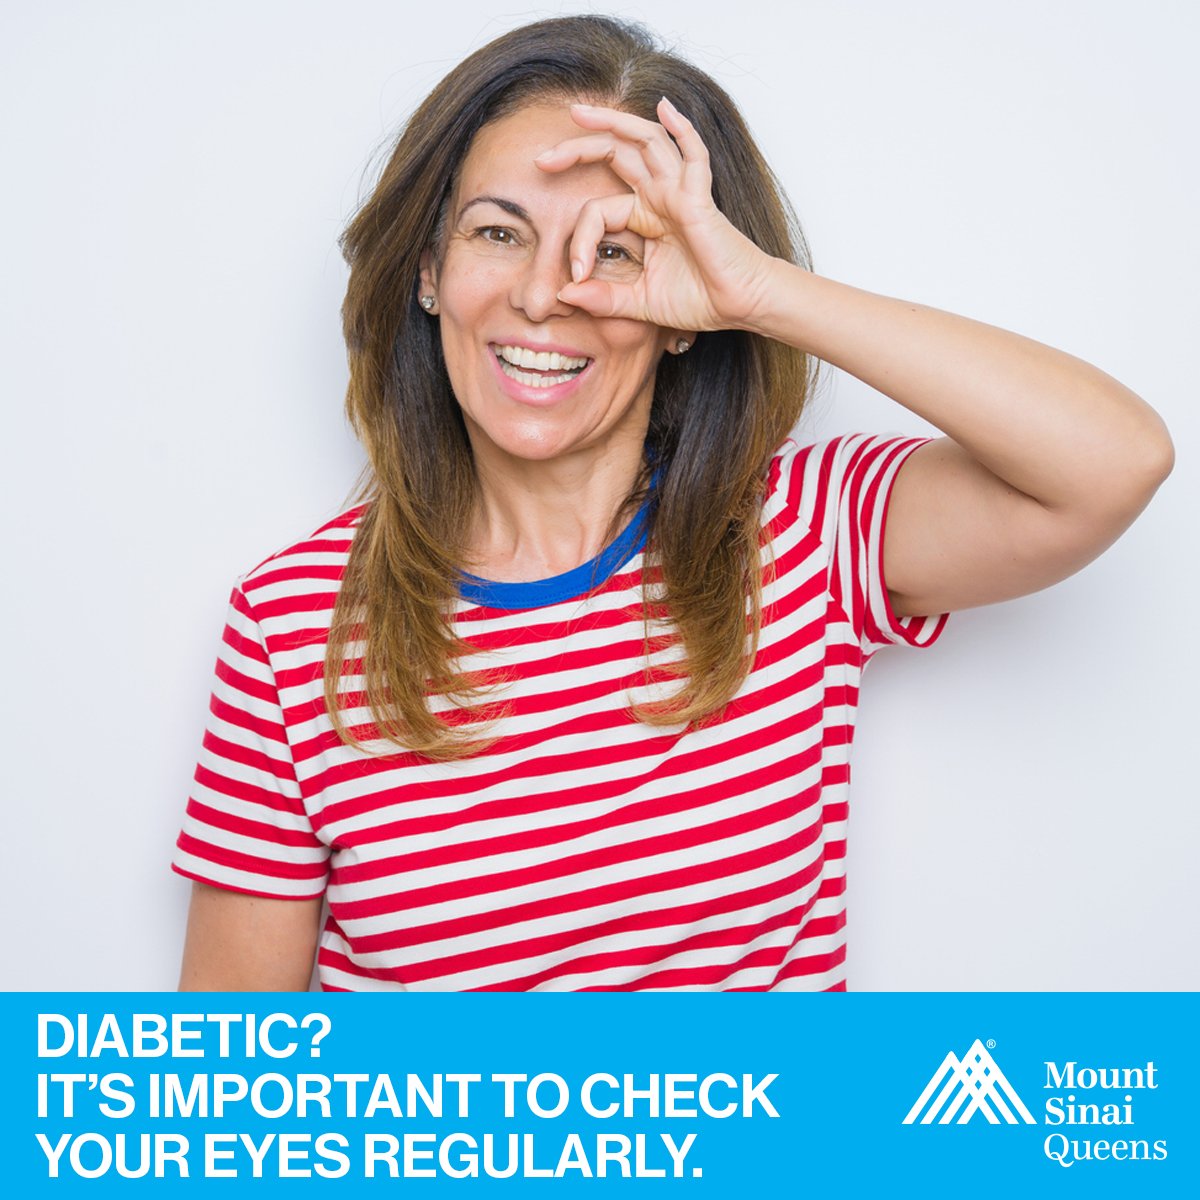 #WellnessWednesday If you have #diabetes, it’s important to check your eyes regularly. Diabetics are more likely to develop #cataracts at a younger age as well as #diabetic retinopathy. #AmericanDiabetesMonth bit.ly/3PomWGU